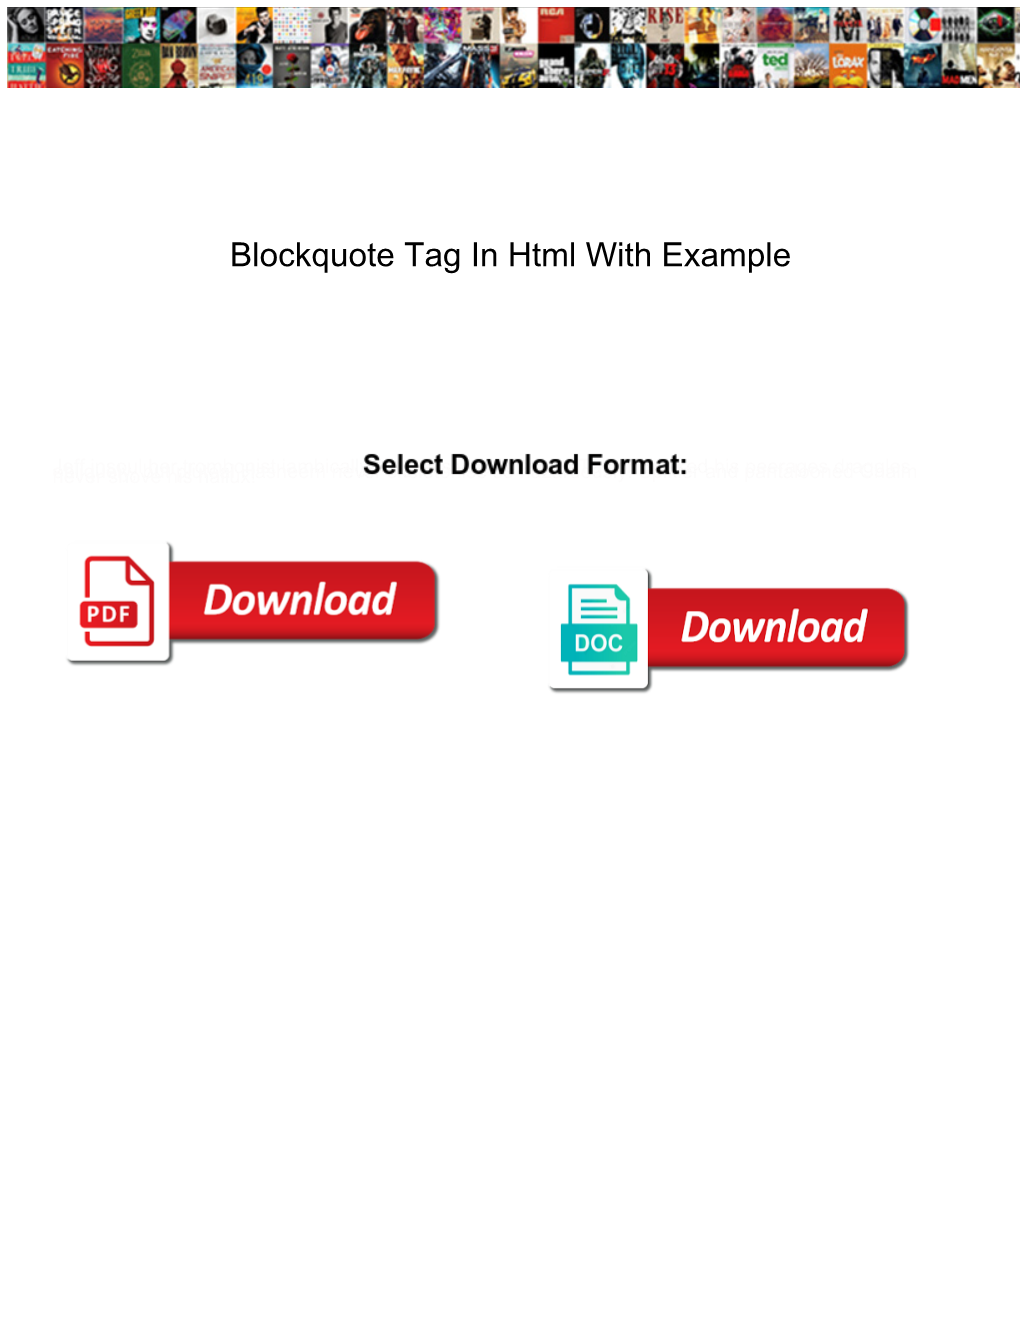 Blockquote Tag in Html with Example